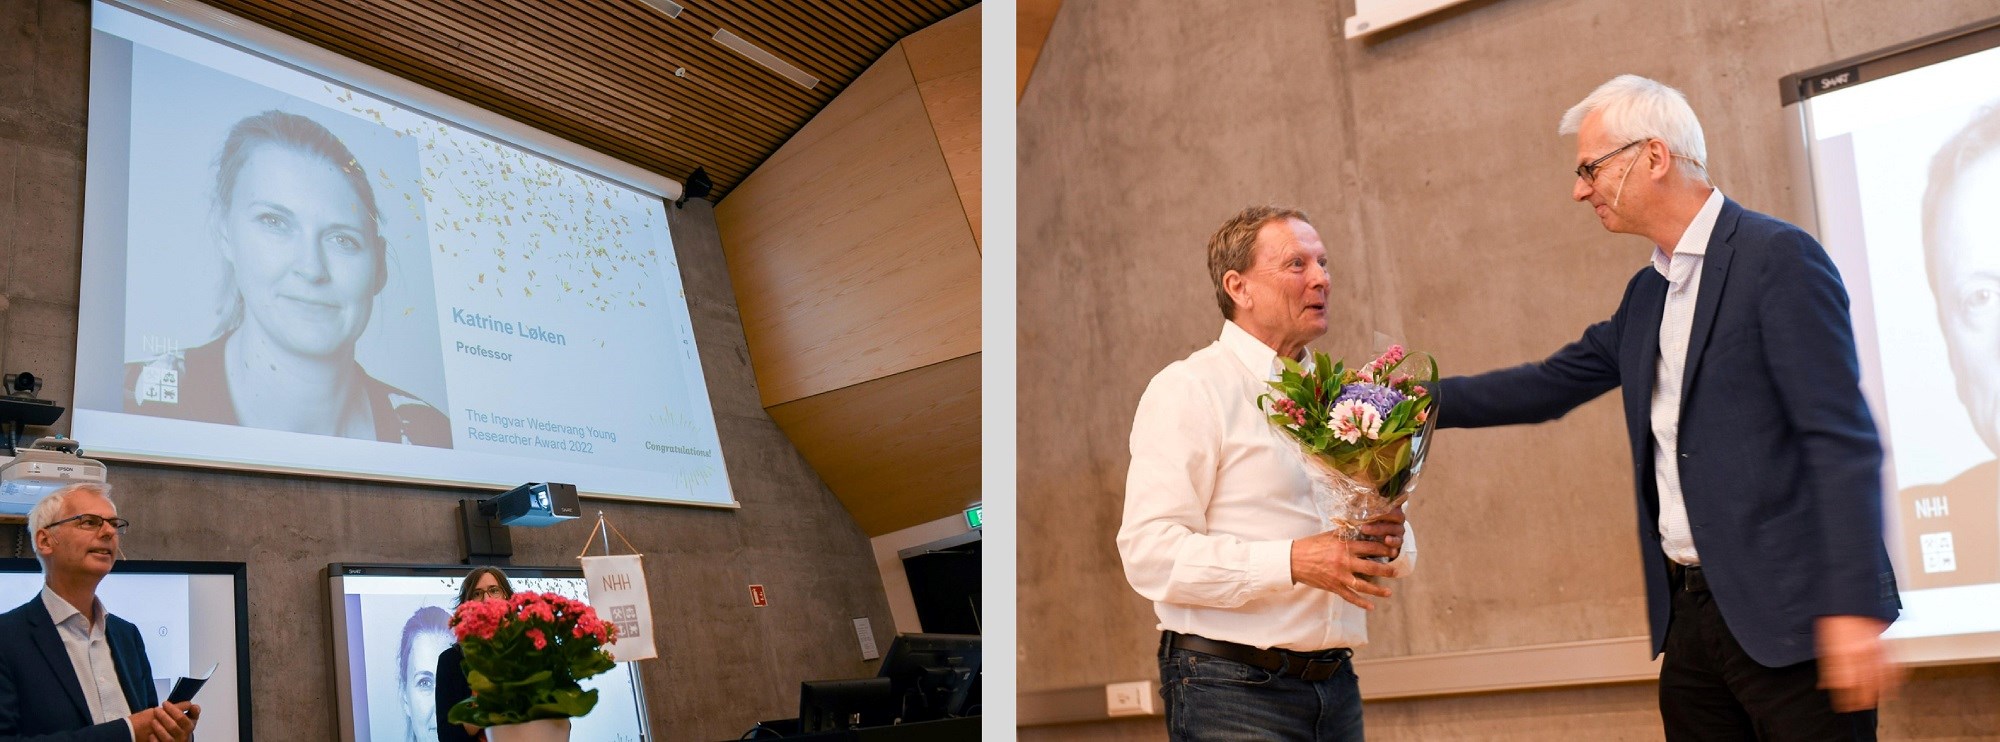 The prestigious awards Ingvar Wedervang Young Researcher Award and The Honour Award for Excellent Research were given to Katrine V. Løken and Paul N. Gooderham.